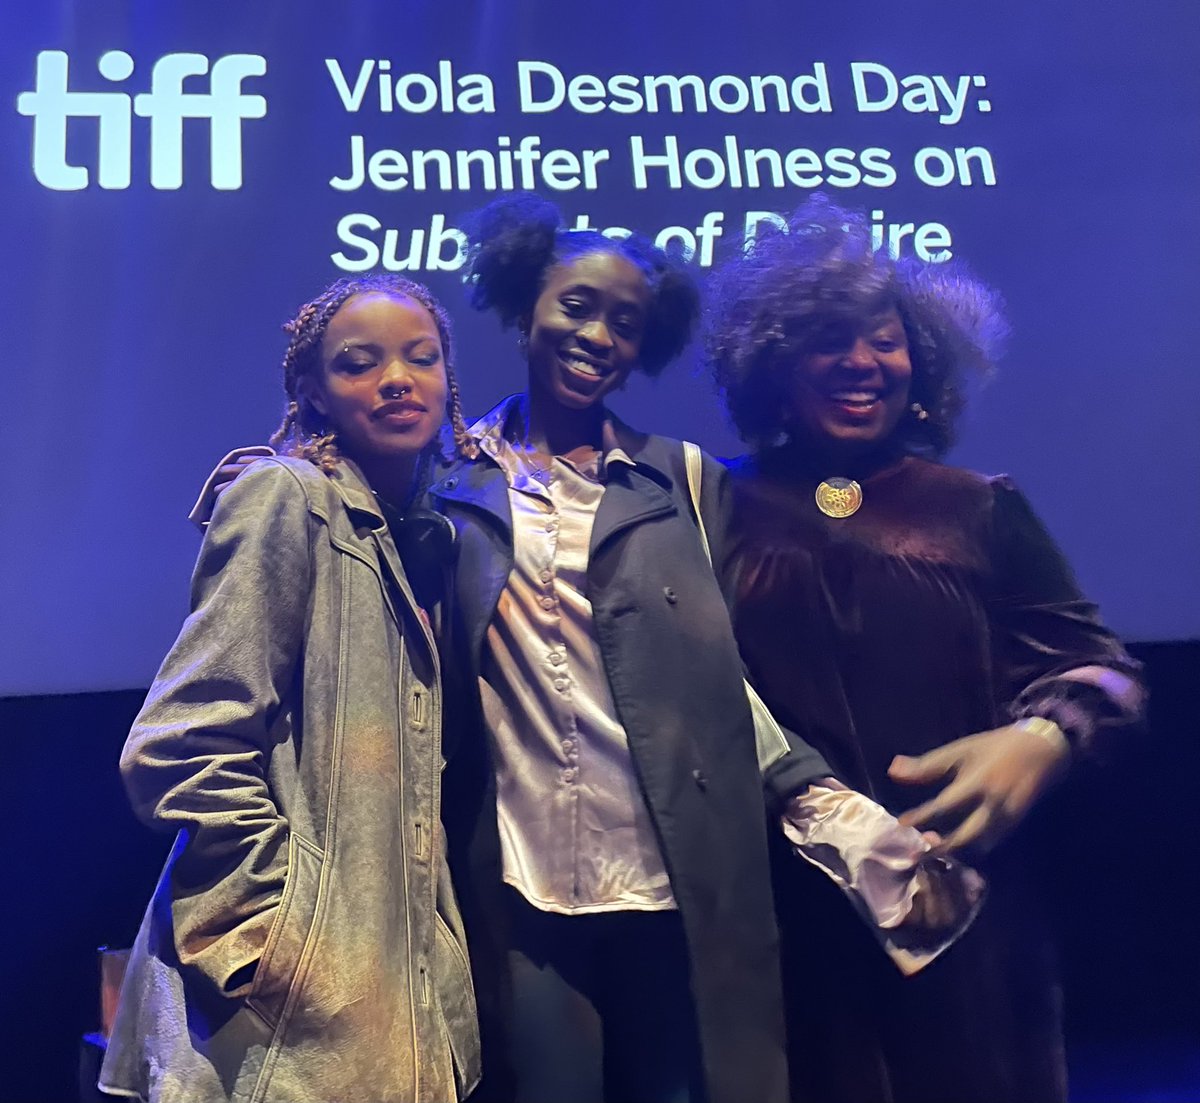 Congratulations to @justjenholness @HungryEyesMedia @Sudz34 for continuing your work on creating a legacy of BLACK FILM CANADA 🇨🇦 #SubjectsOfDesire has got to be one of the best movies made about #BlackWomen and #Beauty! Shout out to the 2 beautiful young women in the photo!